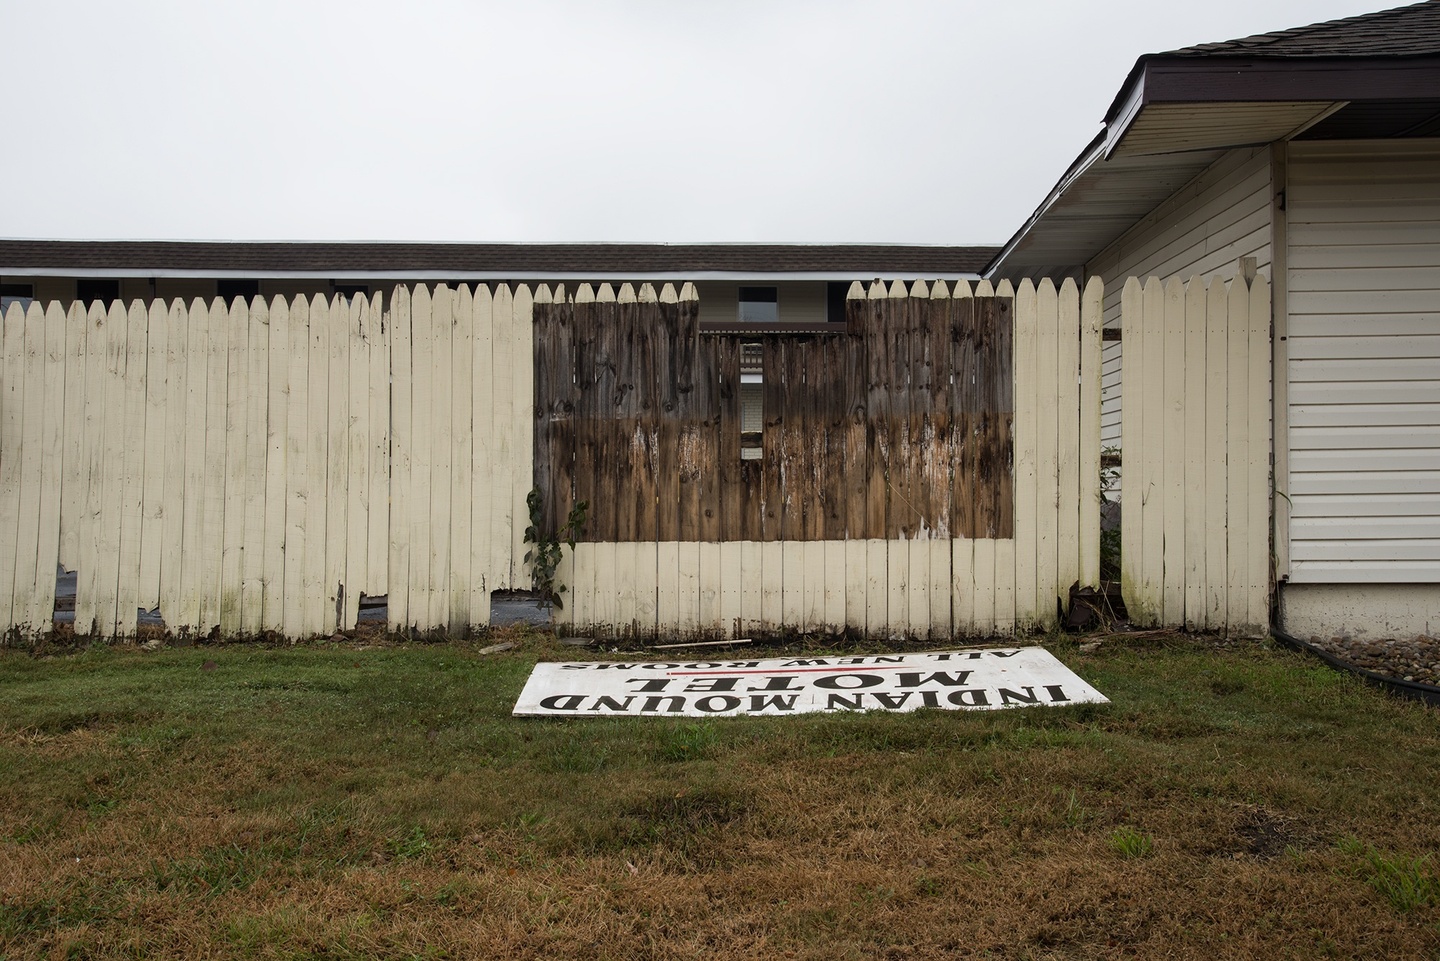 A light-hued fence along the side of a house: a rectangular portion is a darker brown, in front of which on the ground is a hand-lettered sign that reads, "INDIAN MOUND MOTEL" — "ALL NEW ROOMS." The sky is white and the grass on which the sign rests is green-brown.